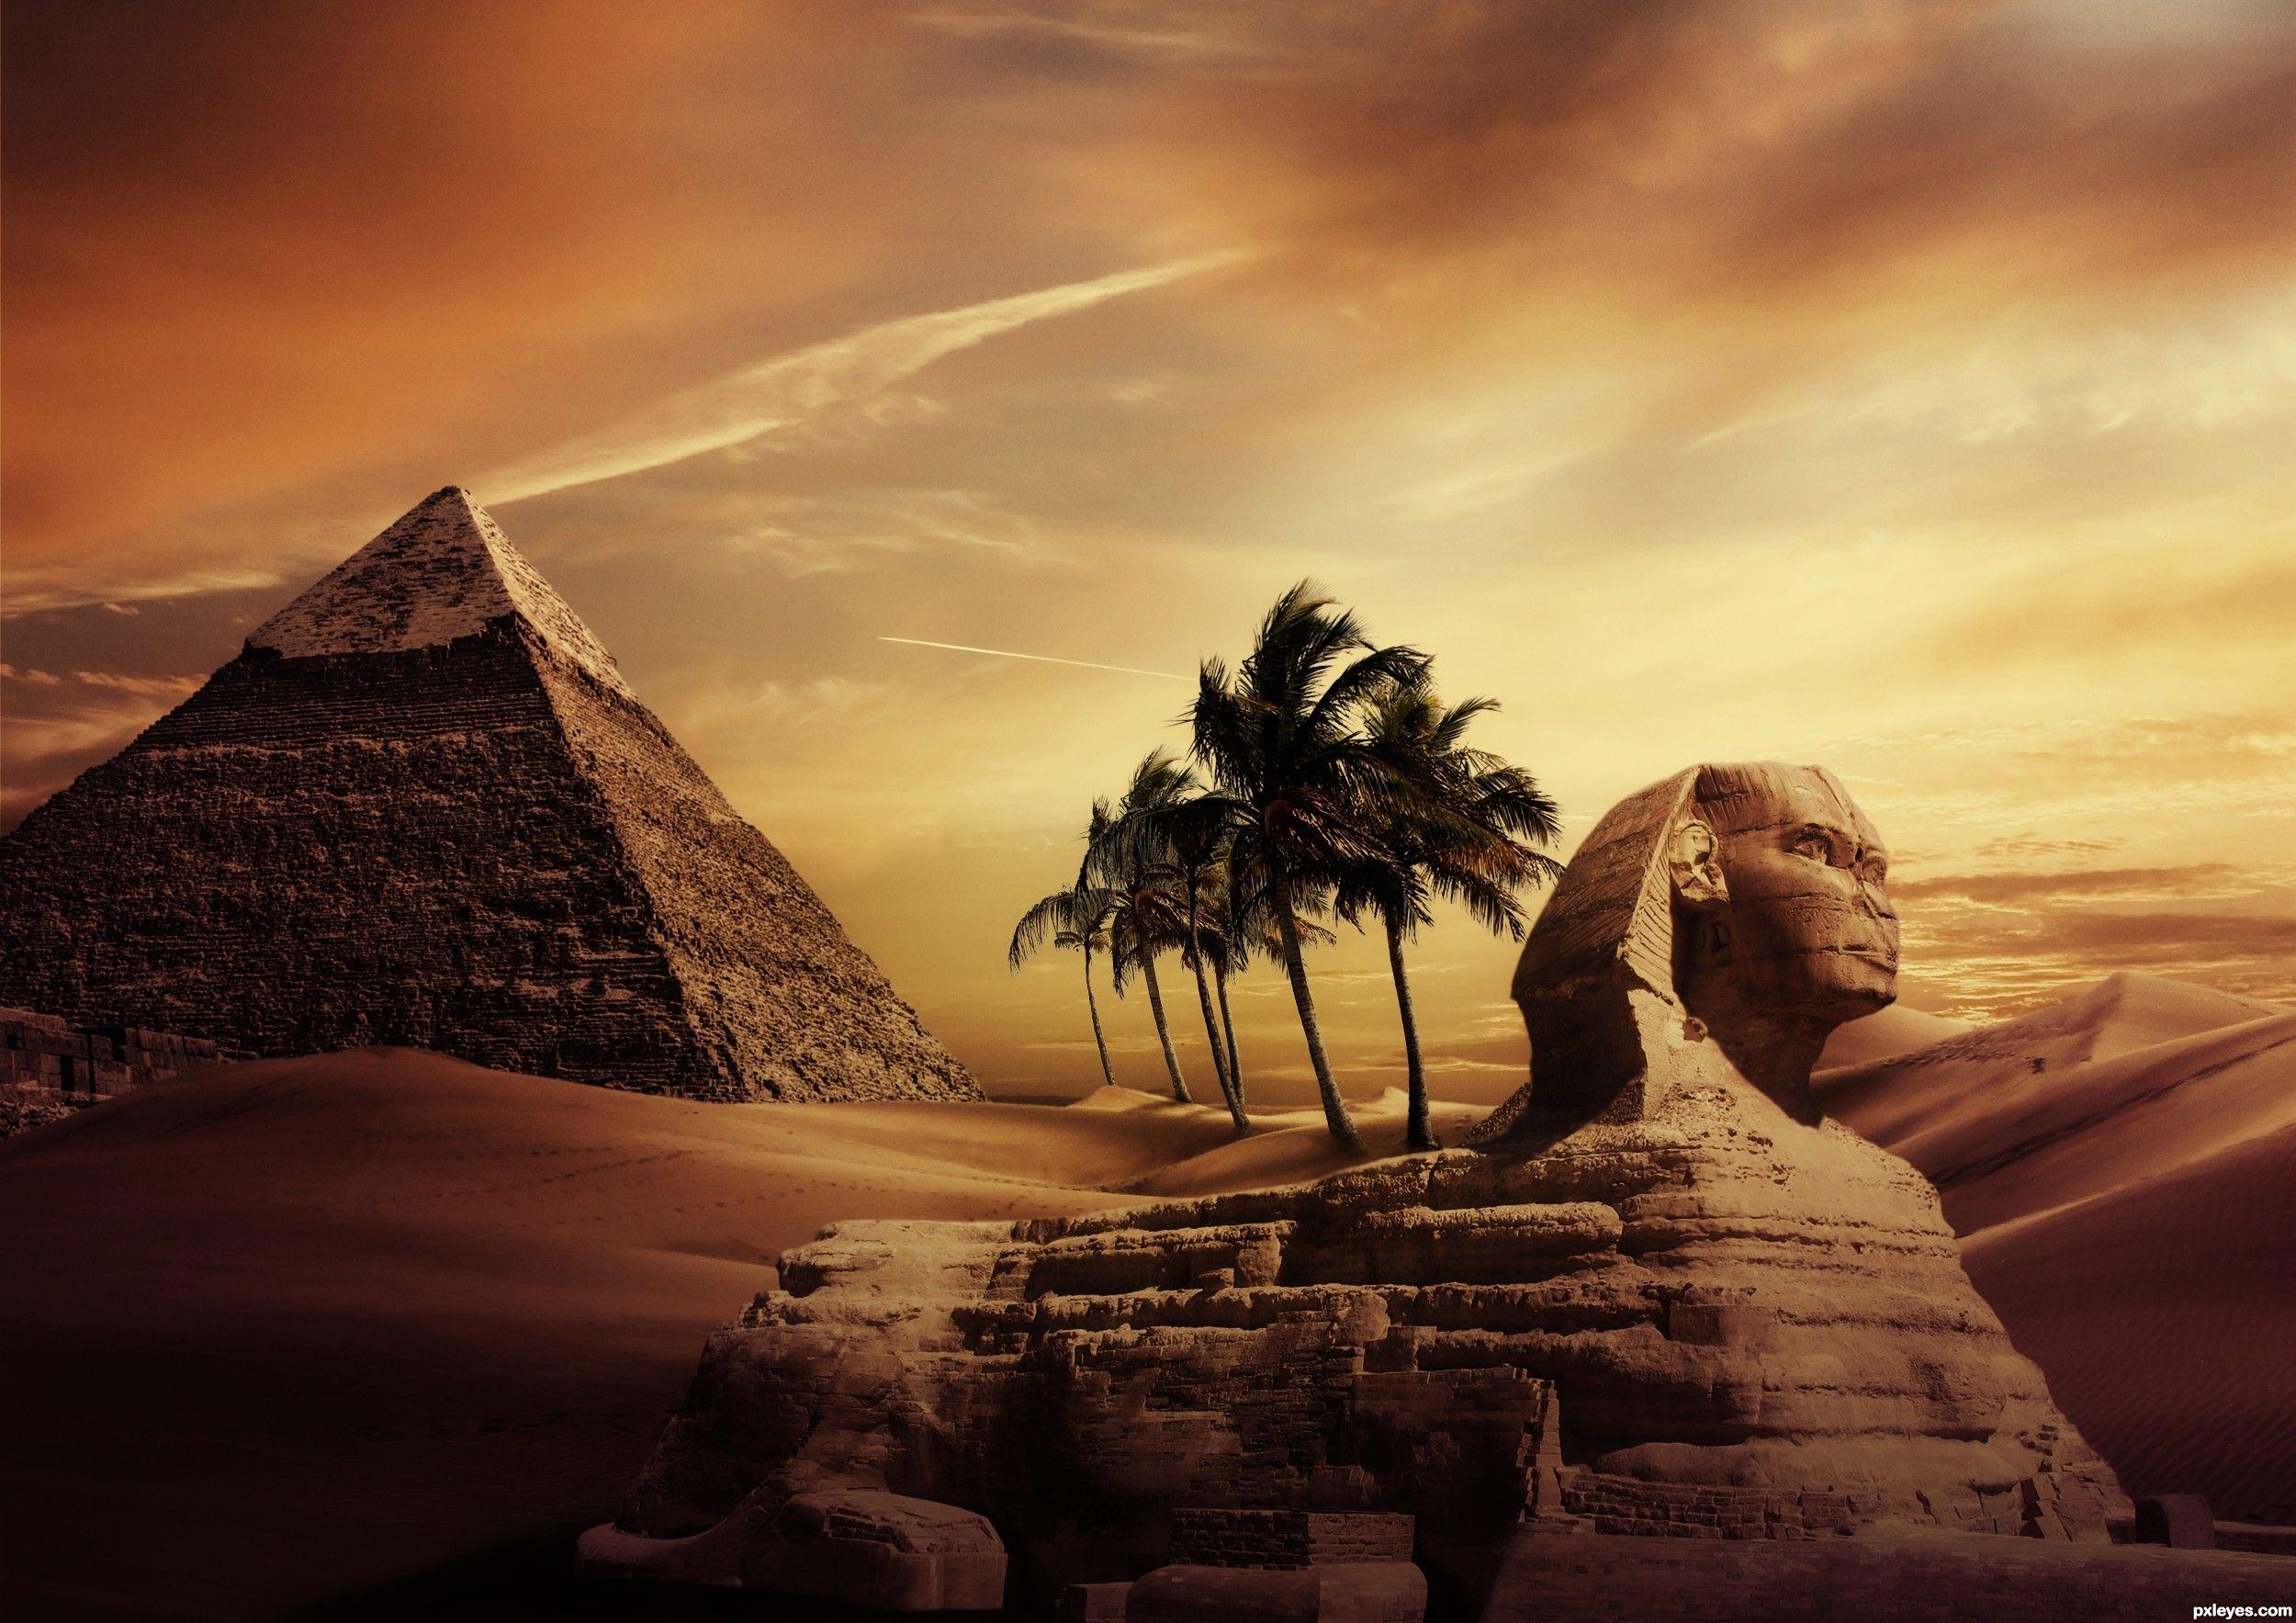 390426 The Sphinx Near Cairo Egypt 4k - Rare Gallery HD Wallpapers